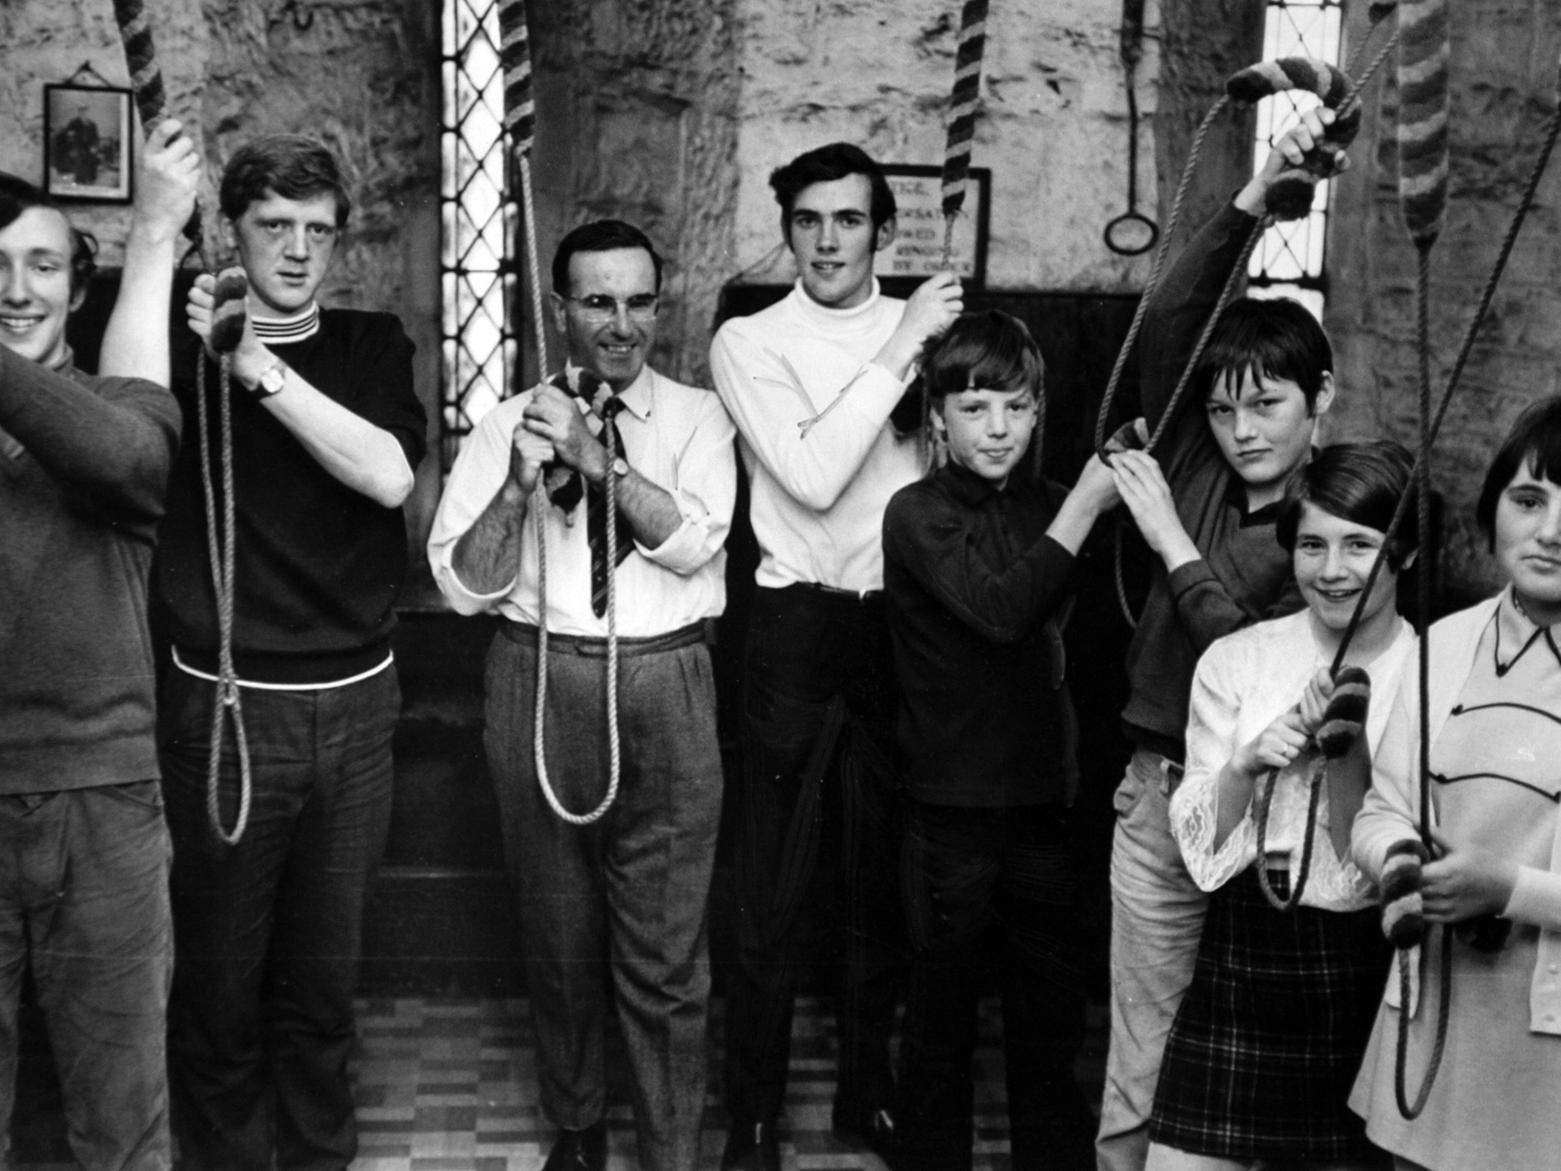 Meet the new bell-ringing team at Armley Christ Church. Pictured, left to right. is Nigel Thornton, Philip Barehead, Edward Lofthouse, Richard Thornton, Michael Tiffany, Stuart Armitage, Denise Rodgers and Sharon Preston.